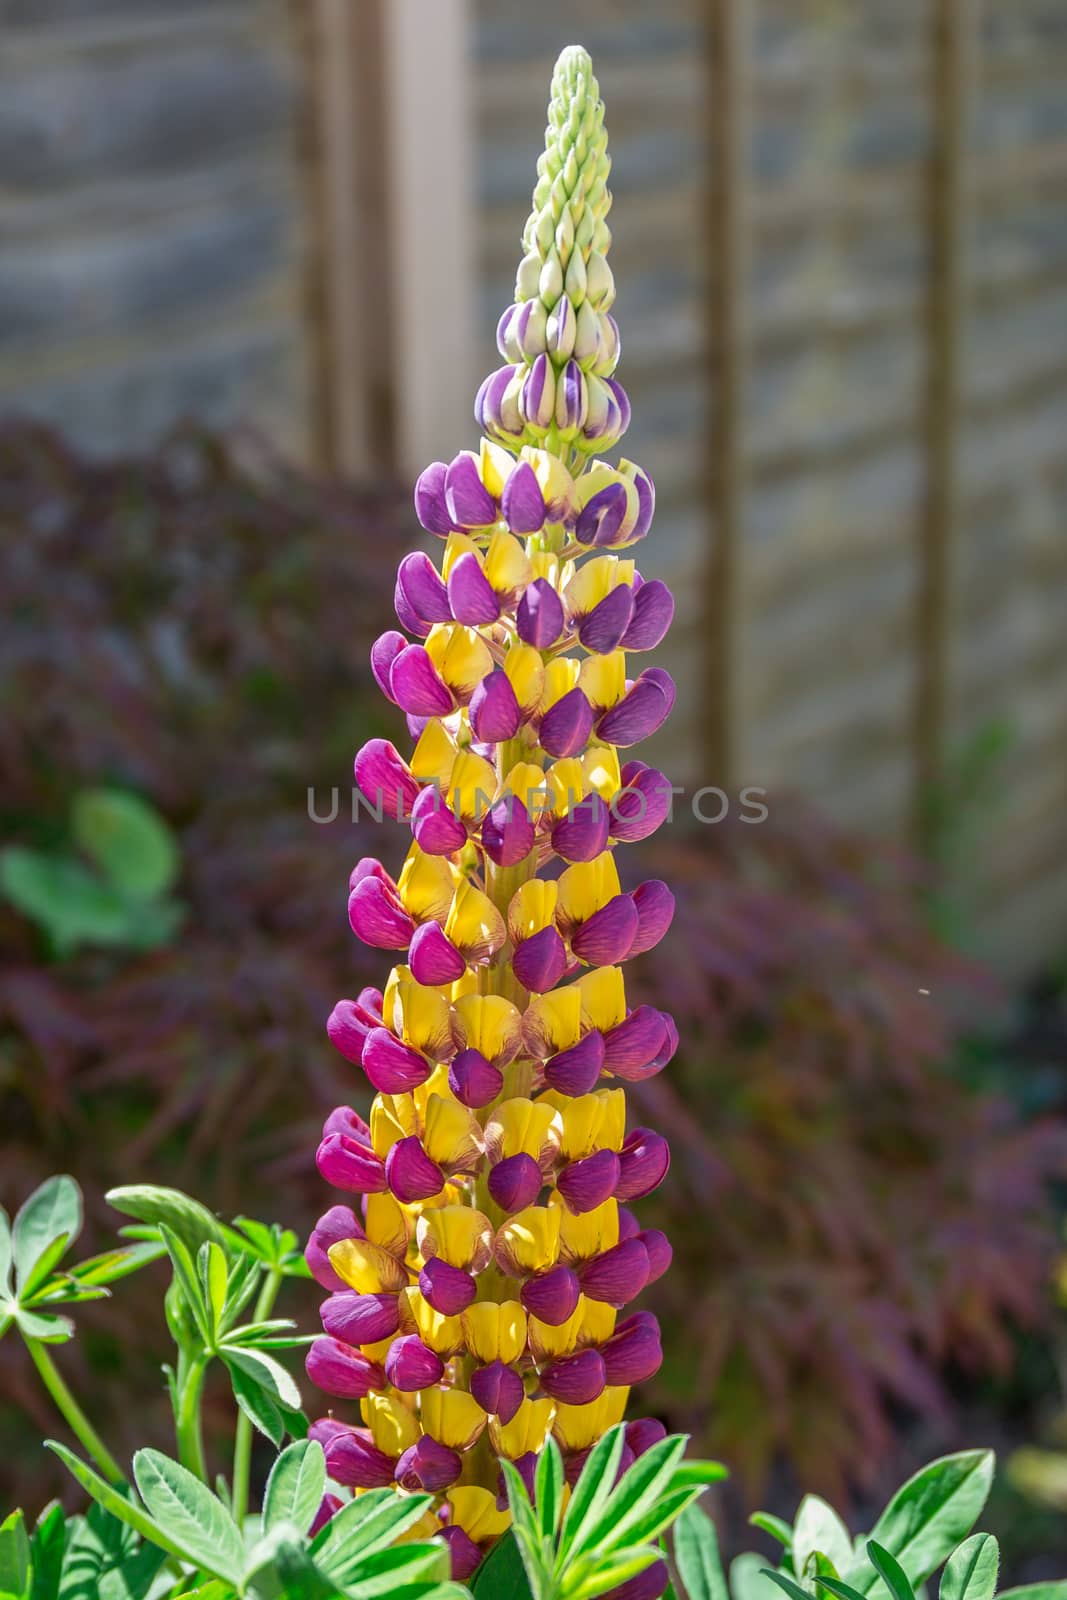 Purple and yellow Lupin Manhattan Lights flowers on display in a residential garden